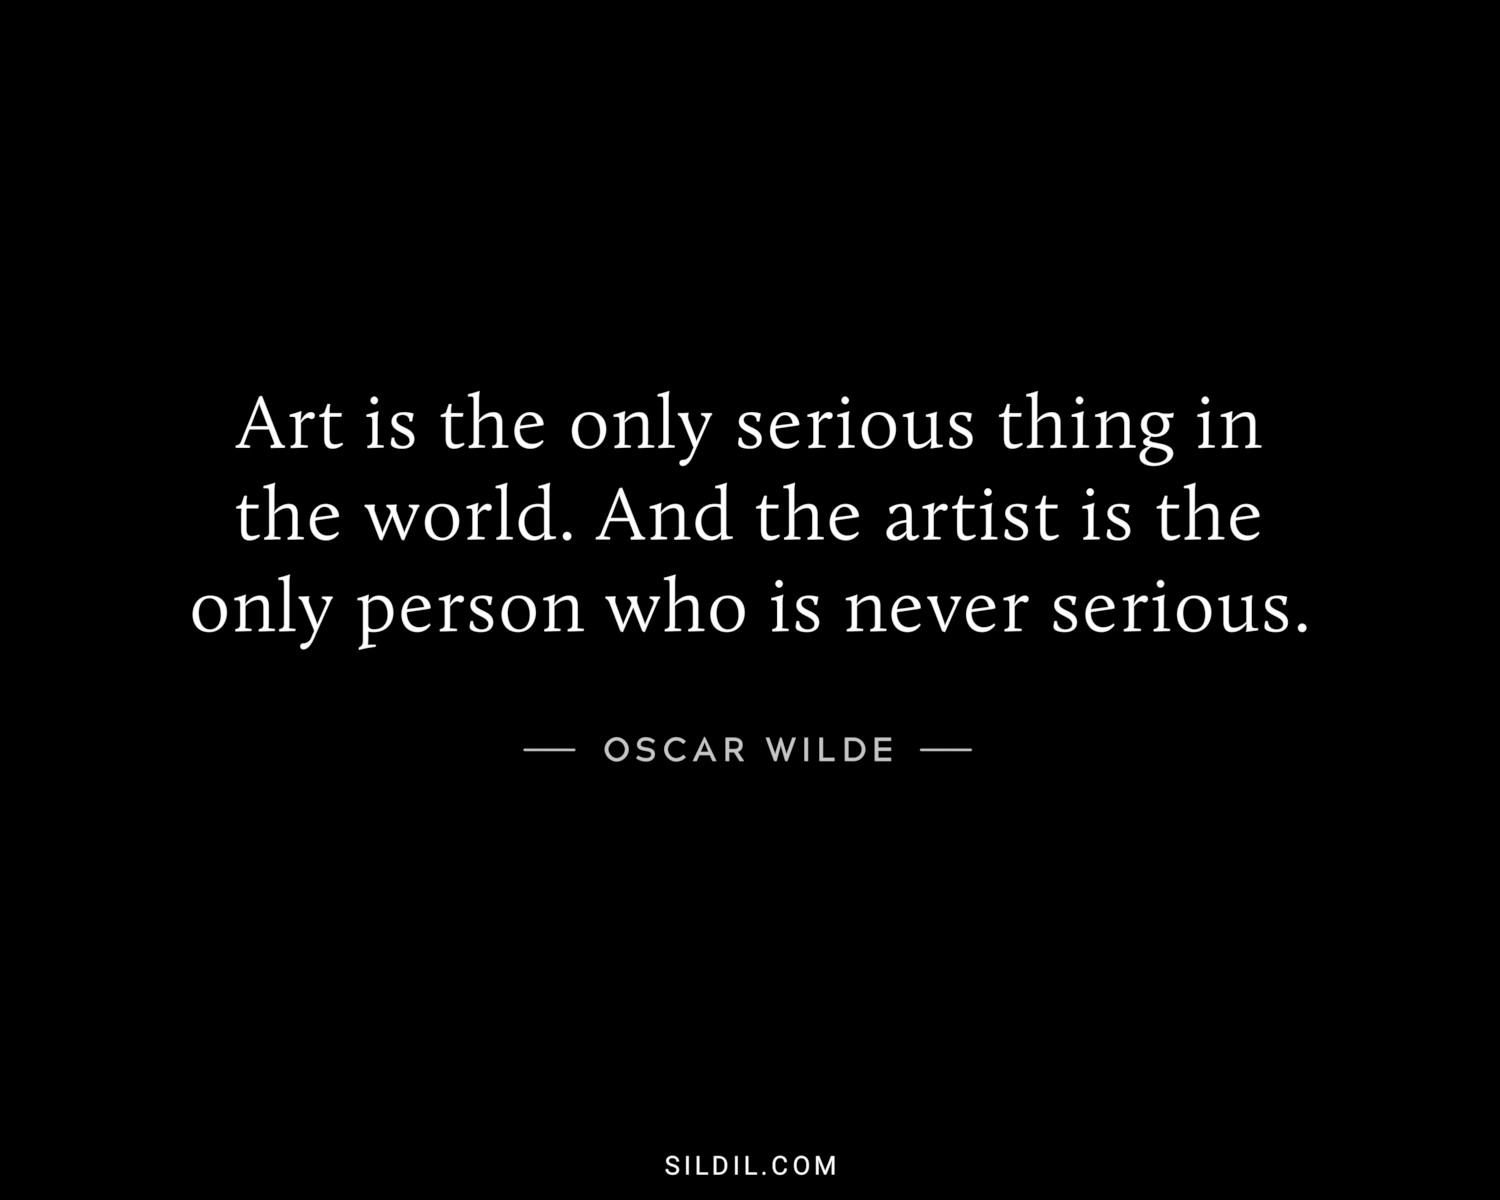 Art is the only serious thing in the world. And the artist is the only person who is never serious.